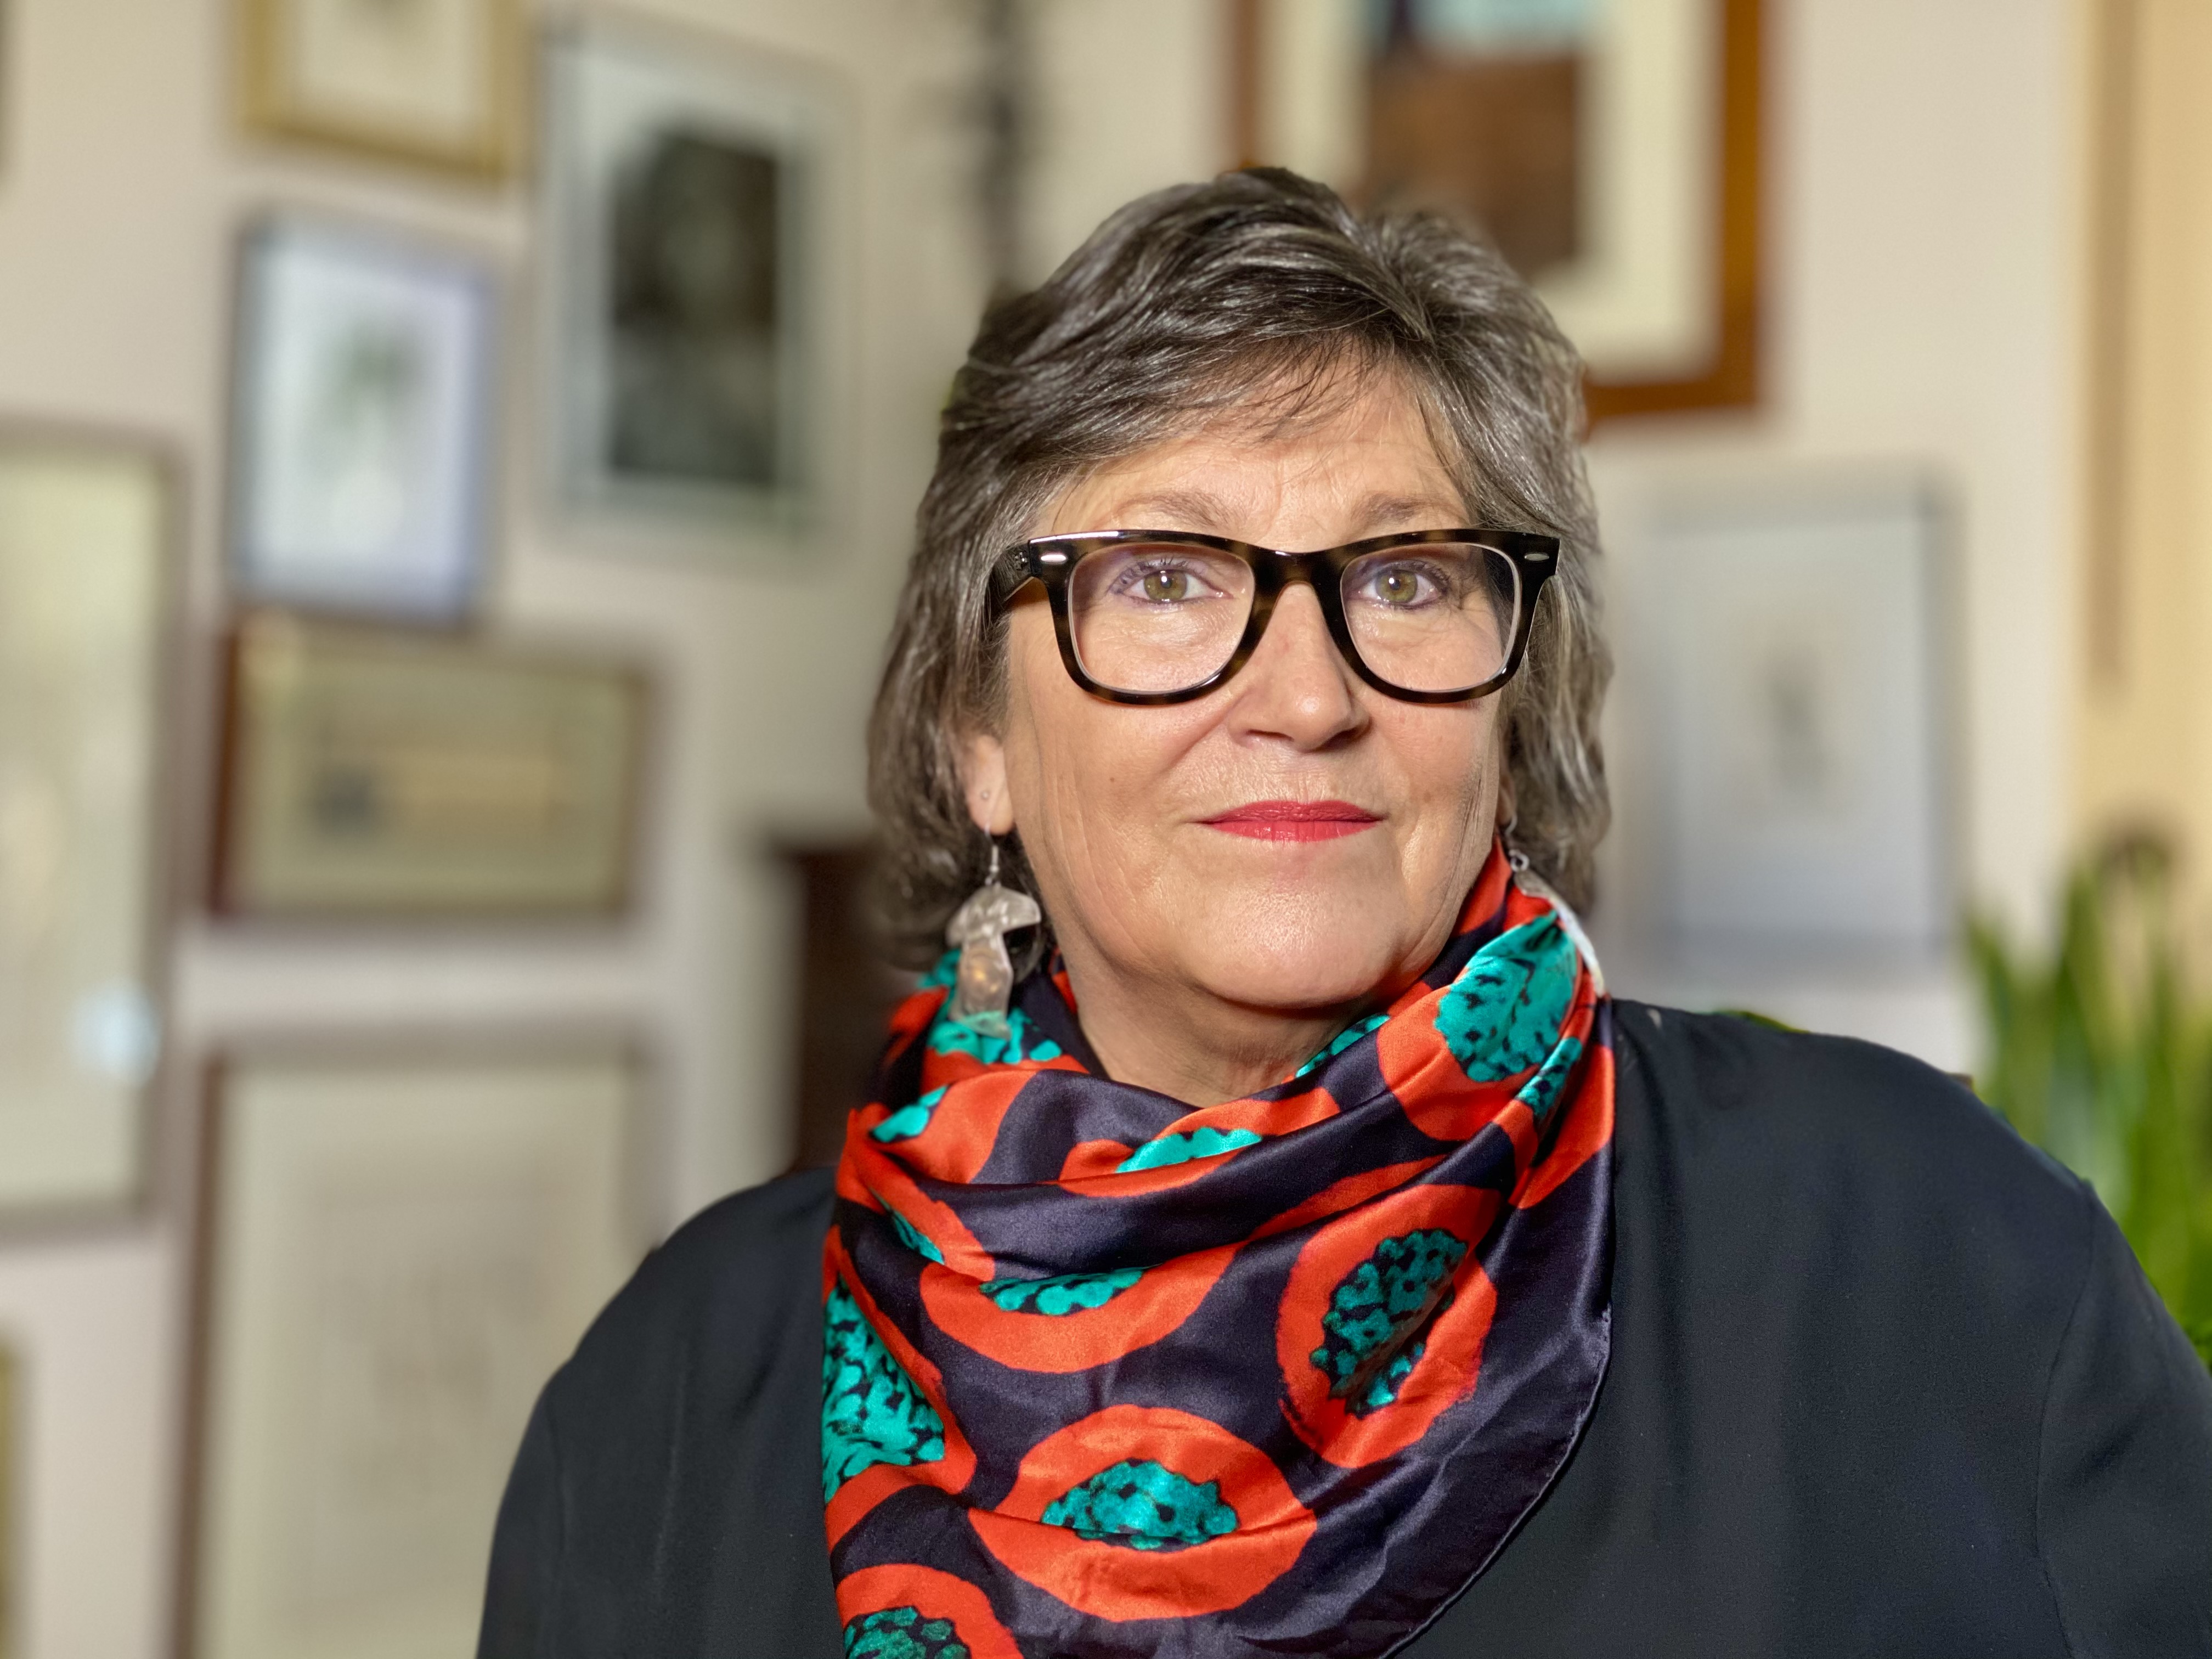 A woman wearing a black shirt and brightly coloured scarf and glasses looks at the camera